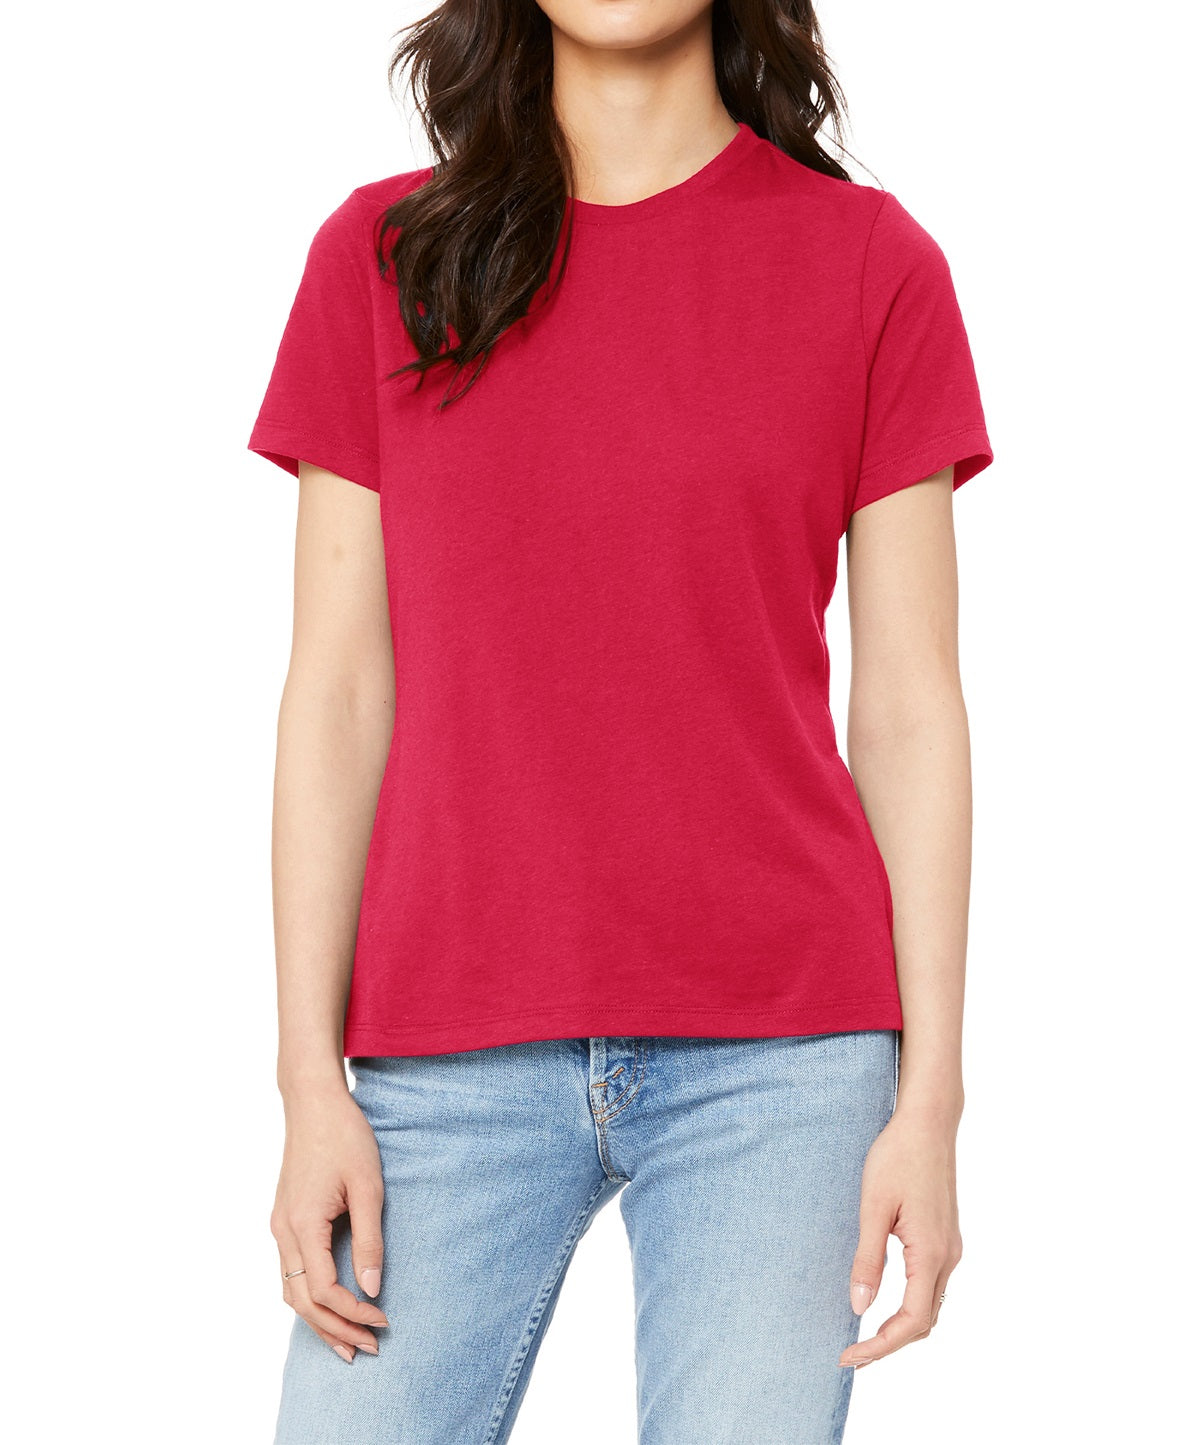 BELLA+CANVAS ® Ladies Relaxed Jersey T-shirt